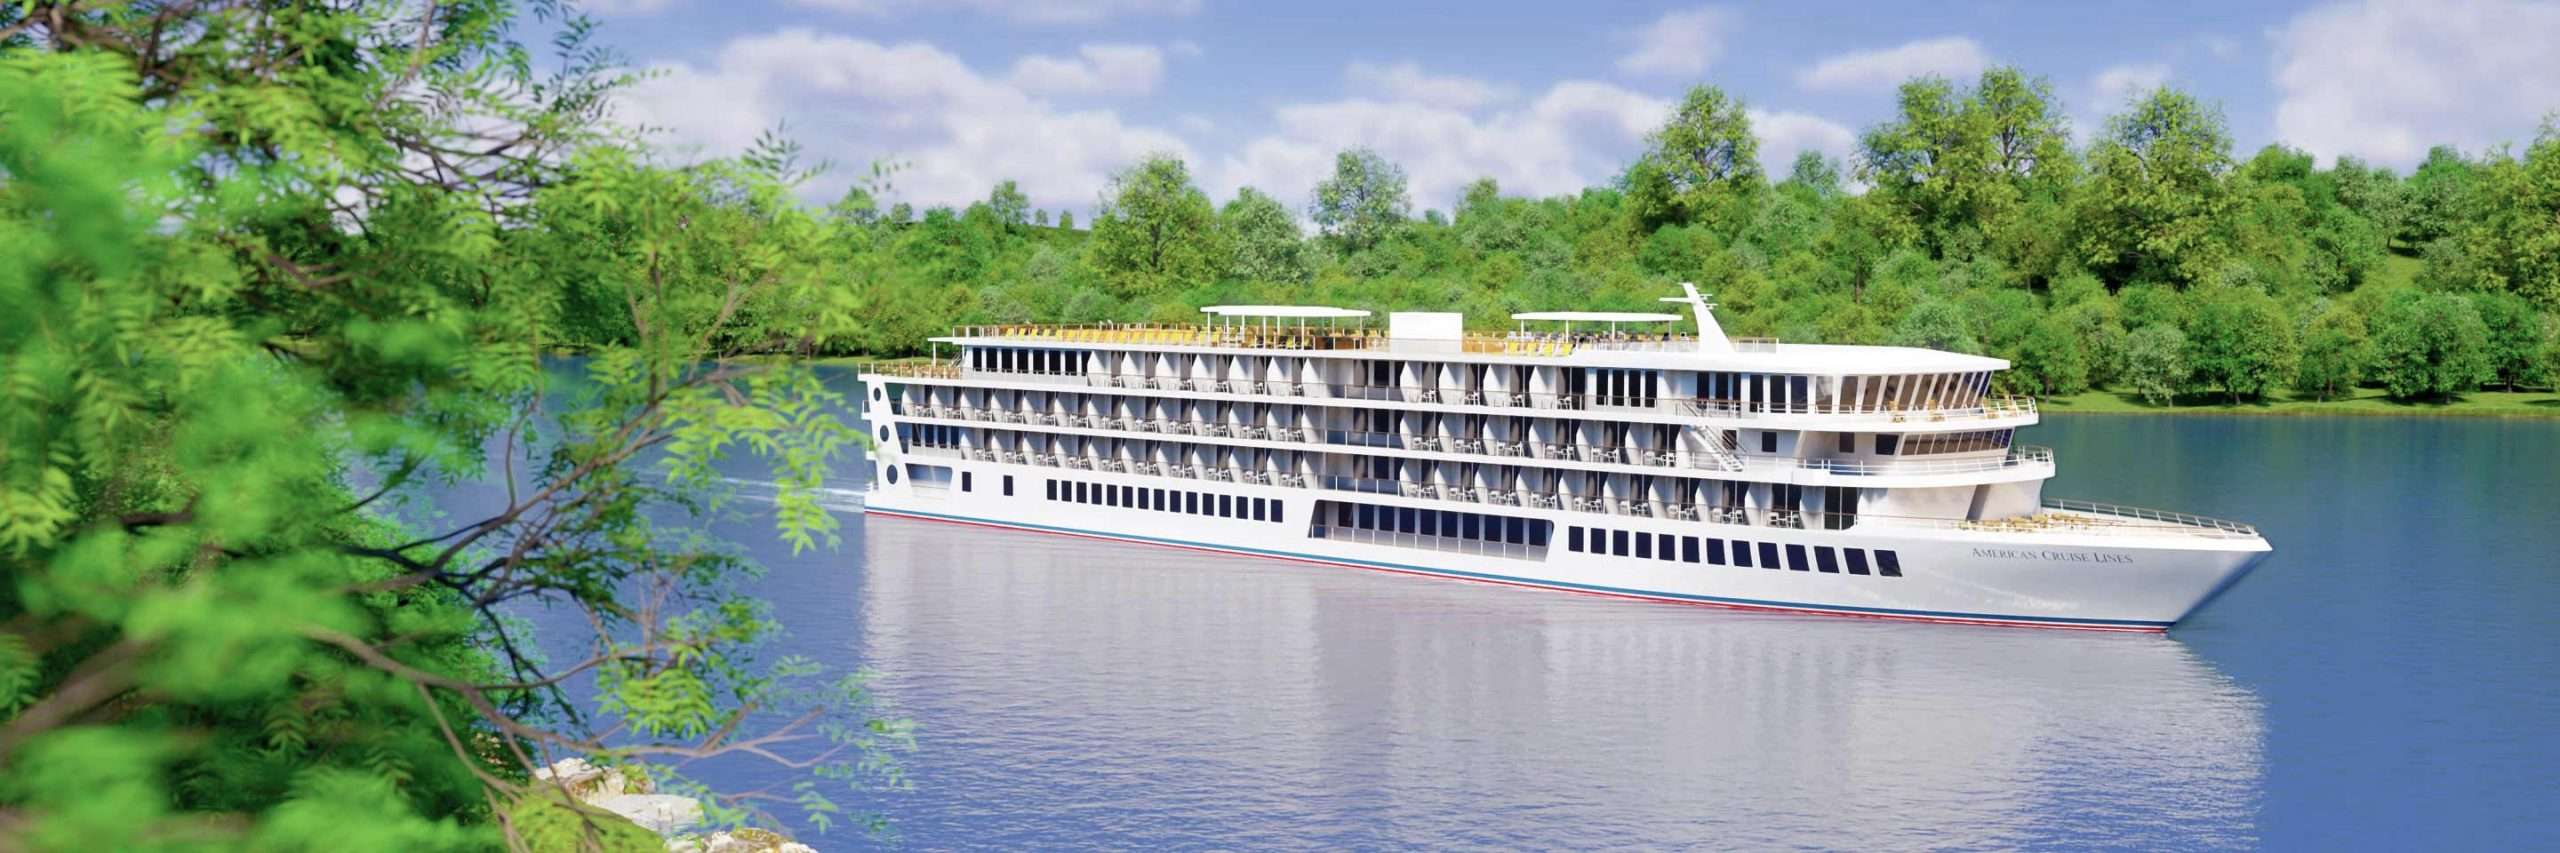 Best Mississippi Riverboat Cruises in 2020